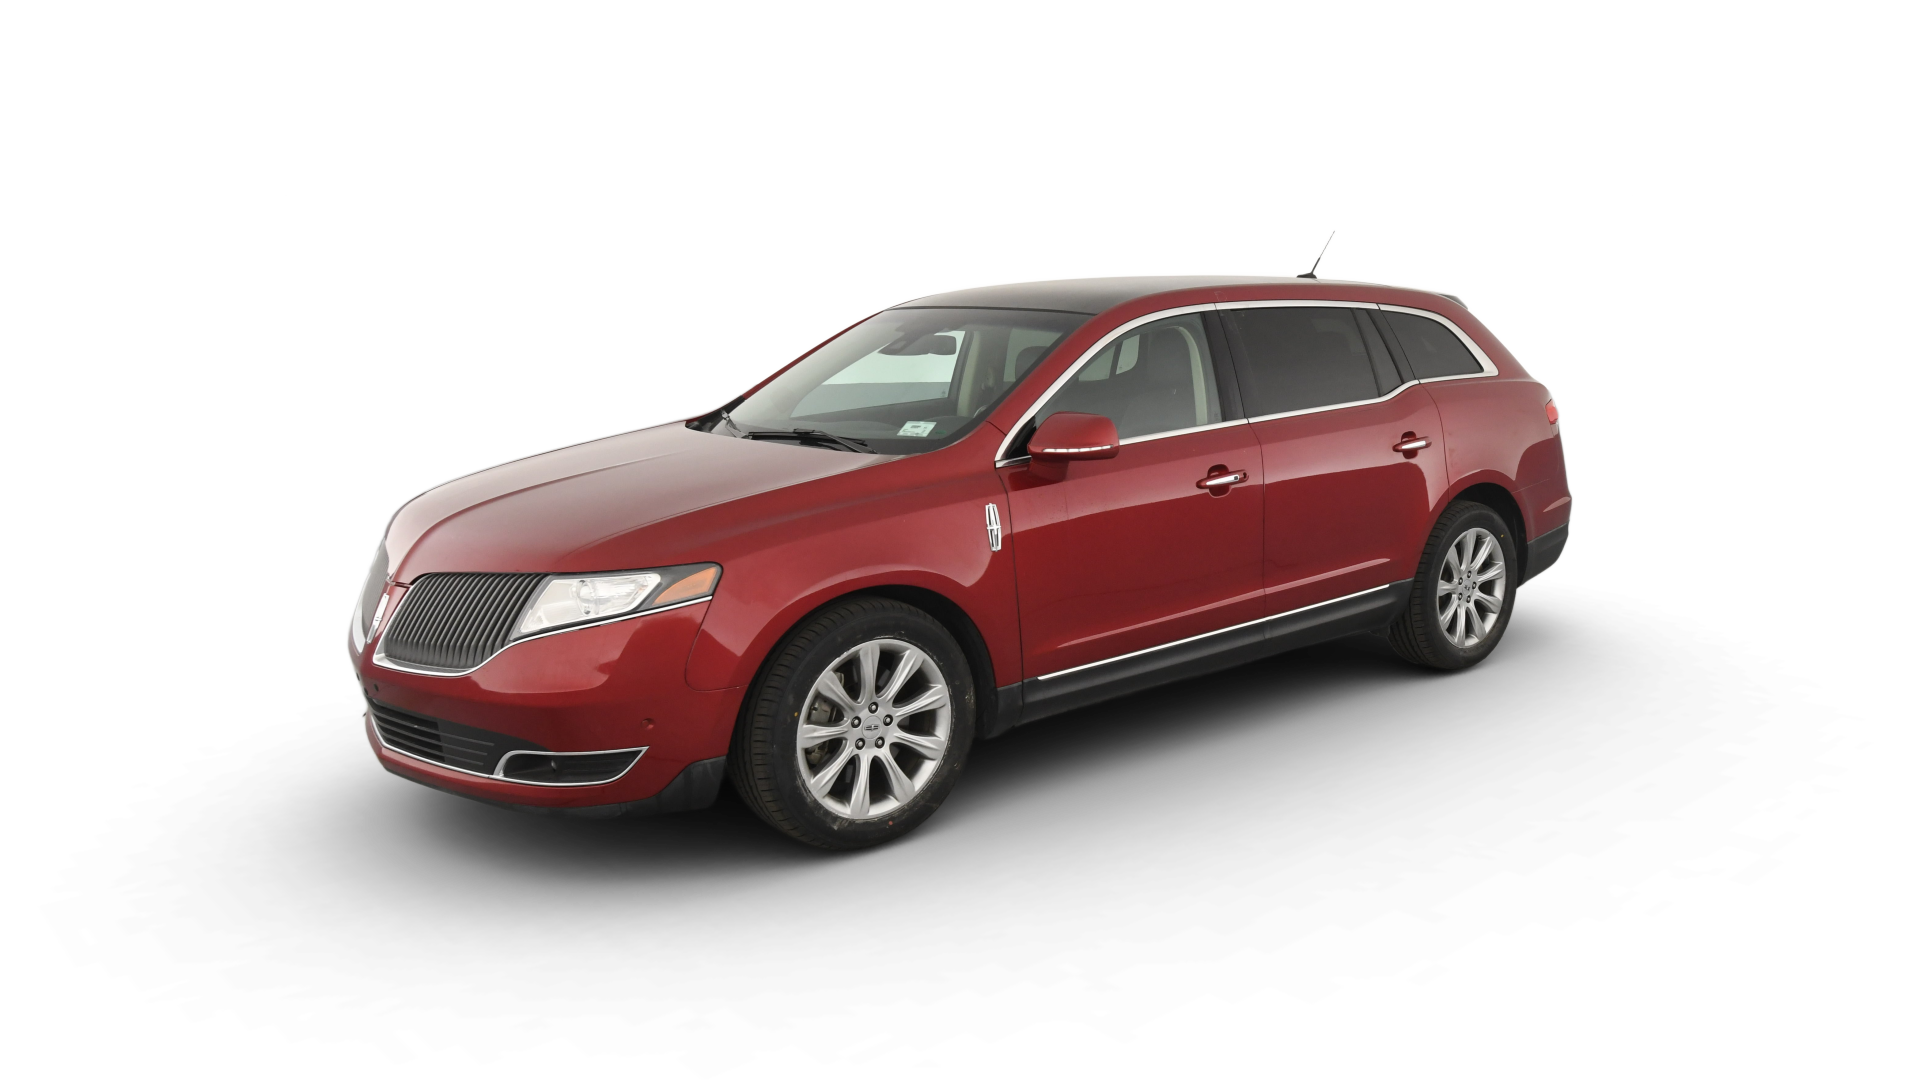 Used Lincoln MKT For Sale Online | Carvana